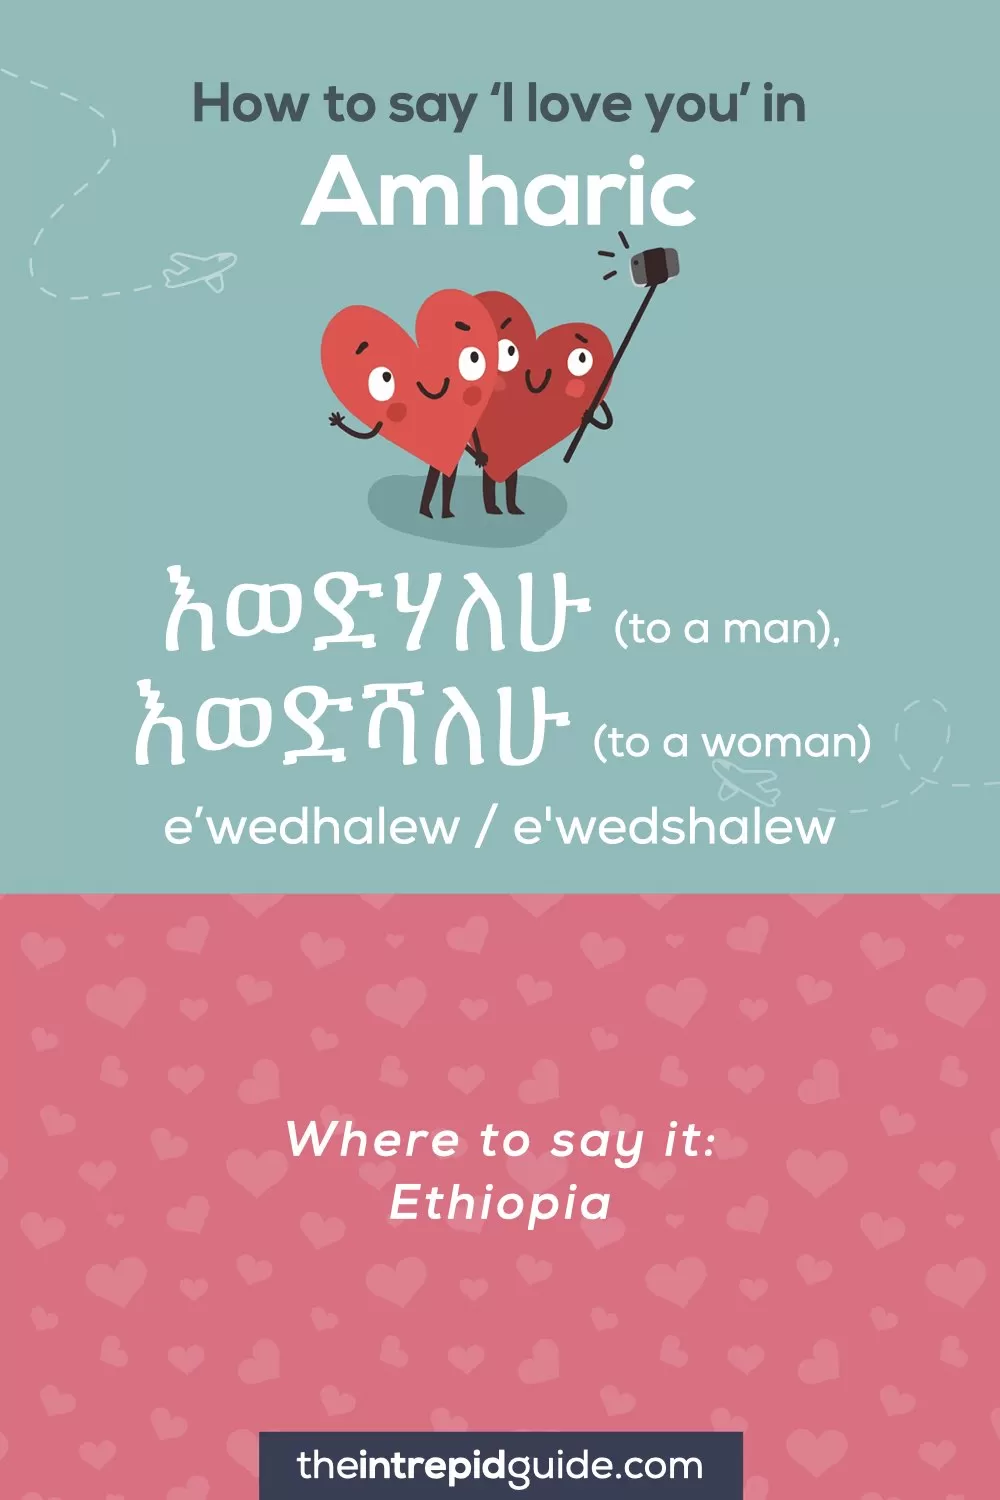 How to say I love you in different languages - Amharic - እወድሃለሁ (to a man), እወድሻለሁ (to a woman)